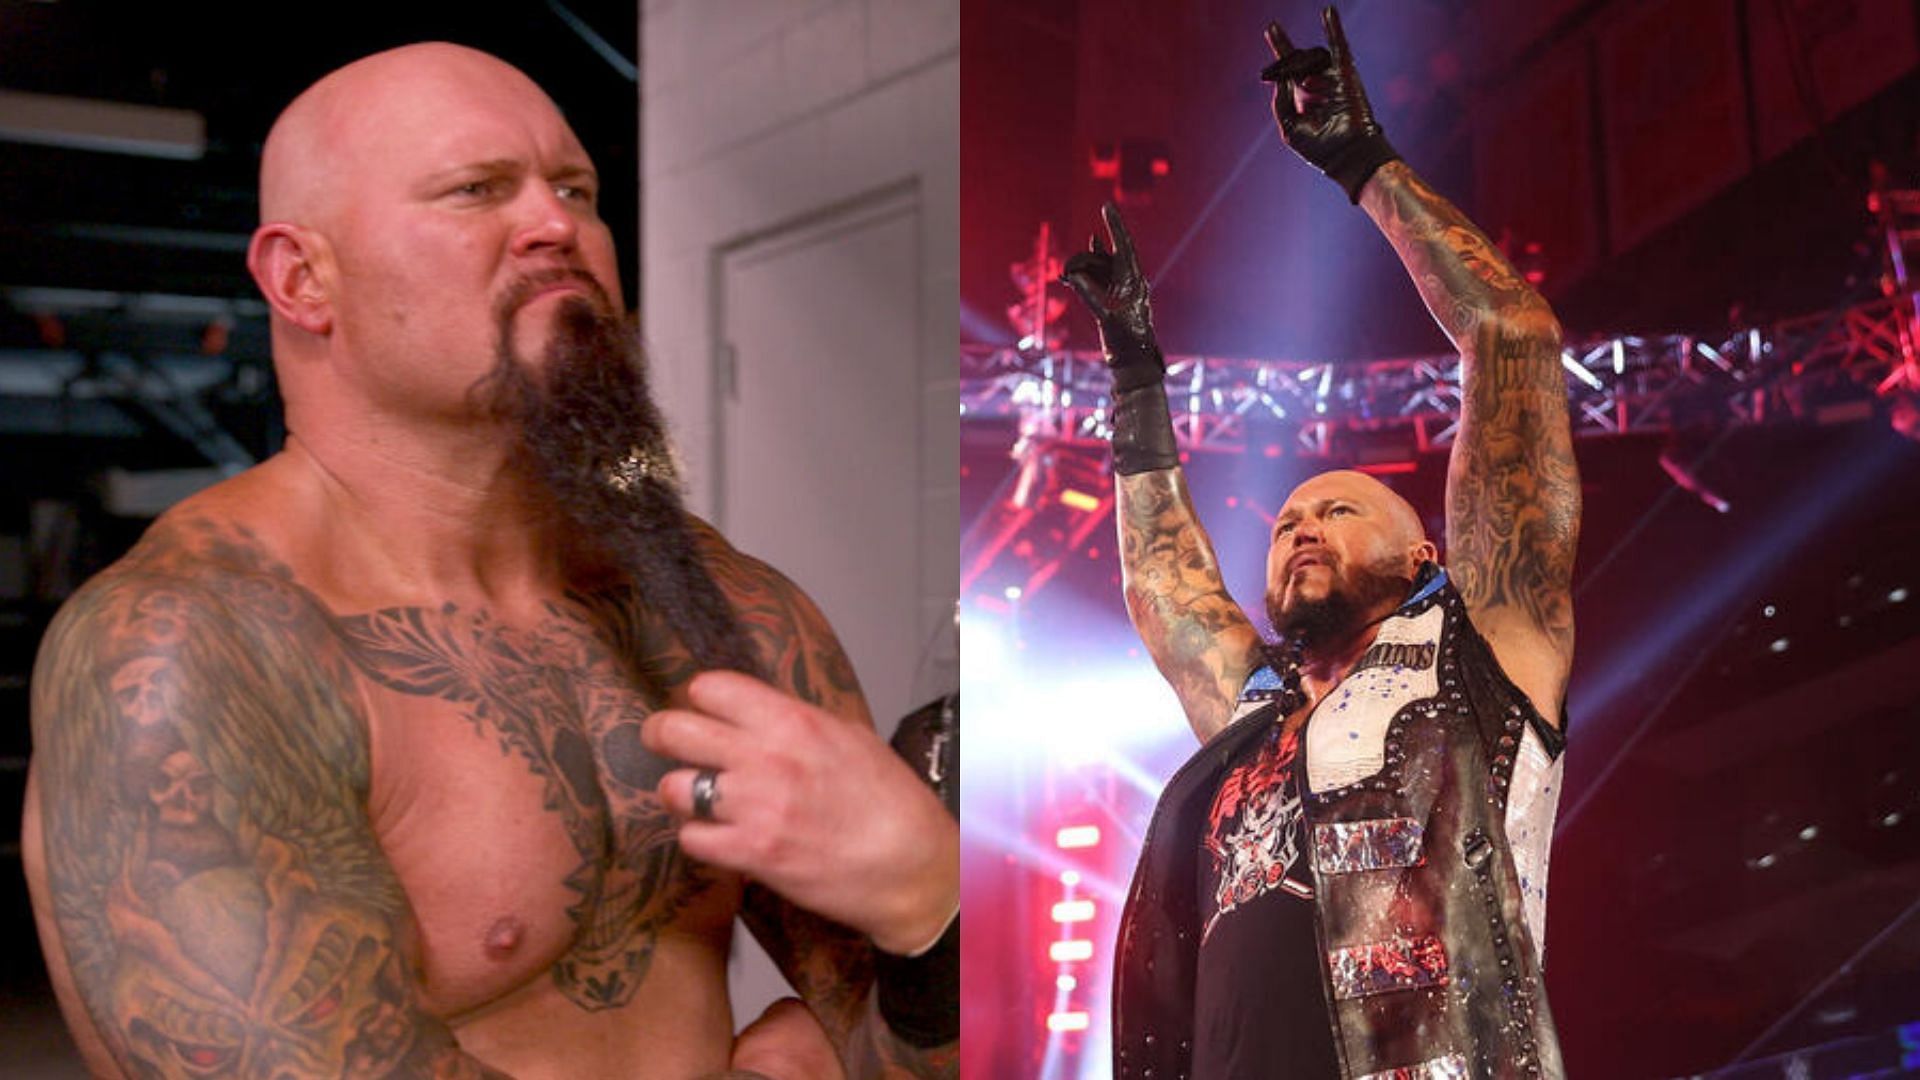 Luke Gallows is currently working on NXT with Karl Anderson in a tag team